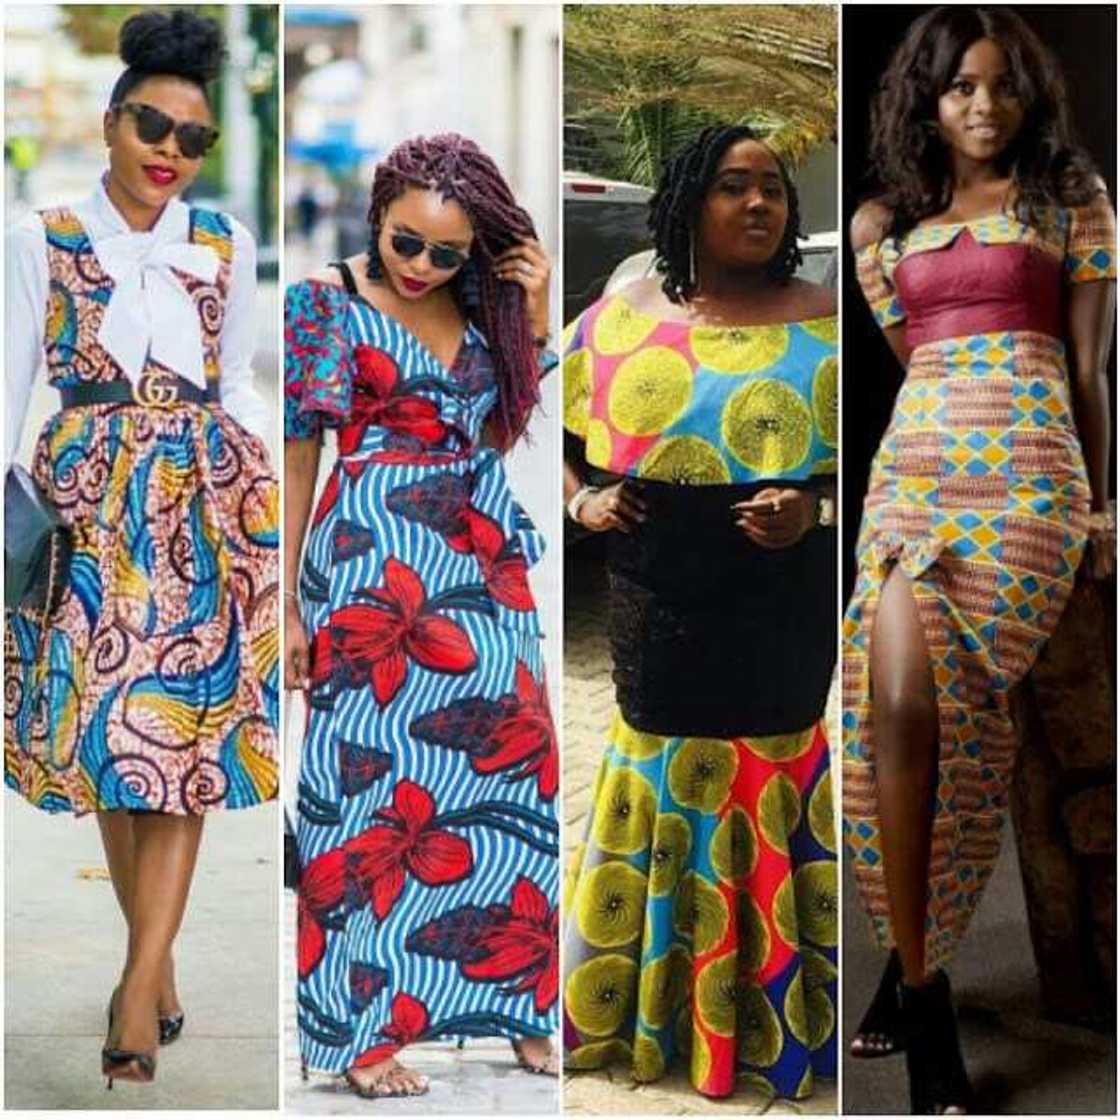 casual chiffon dresses
plus size casual dresses
african print casual dresses